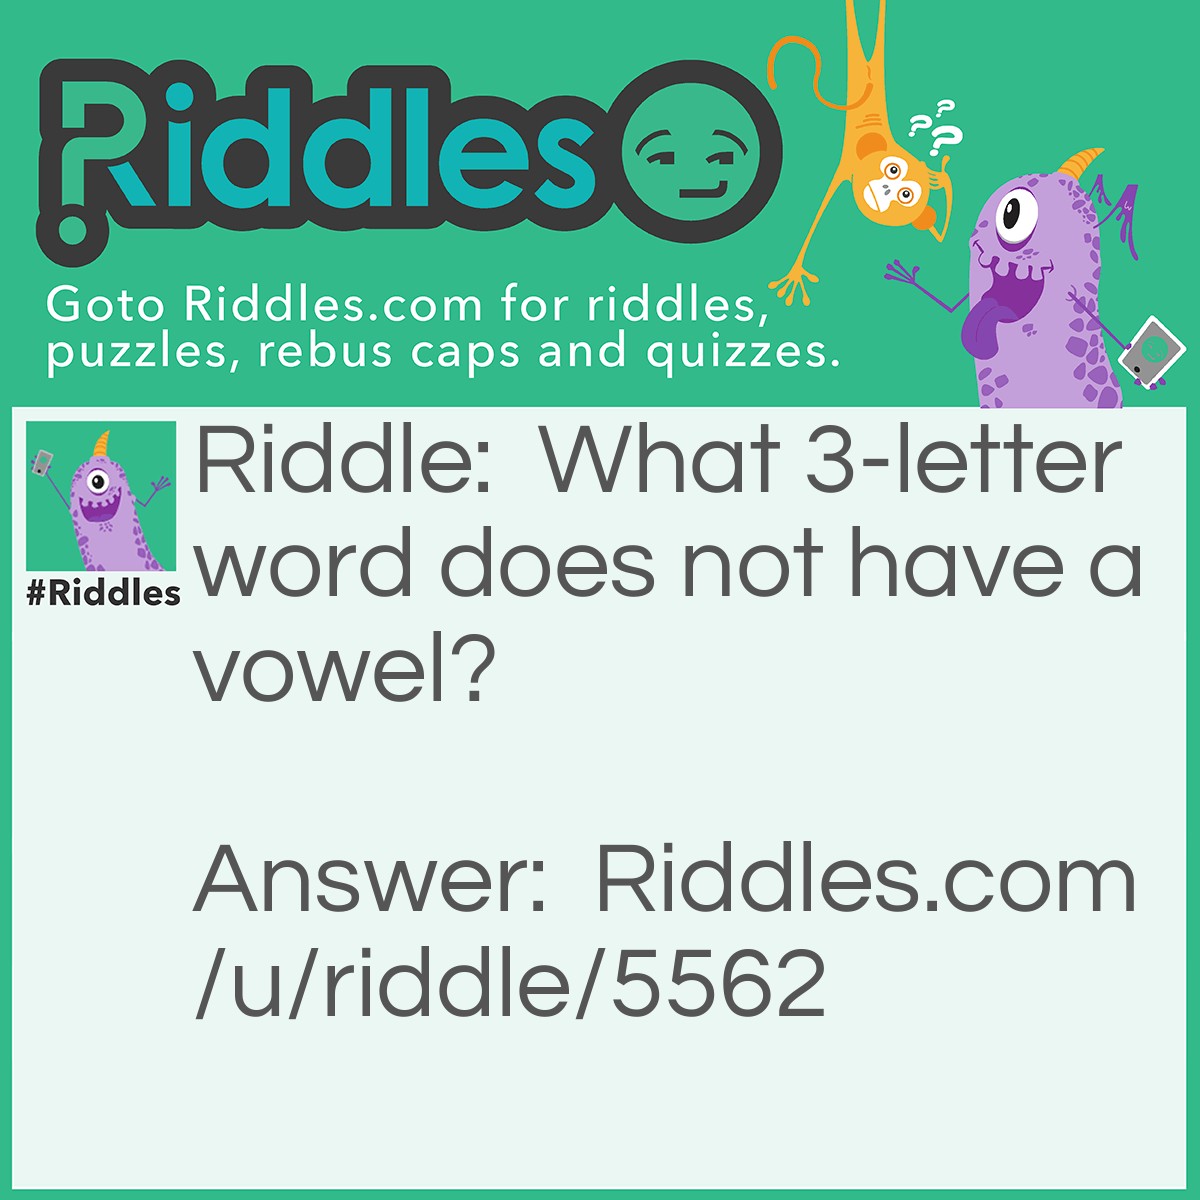 Riddle: What 3-letter word does not have a vowel? Answer: CRY.(other answers accepted, if available)